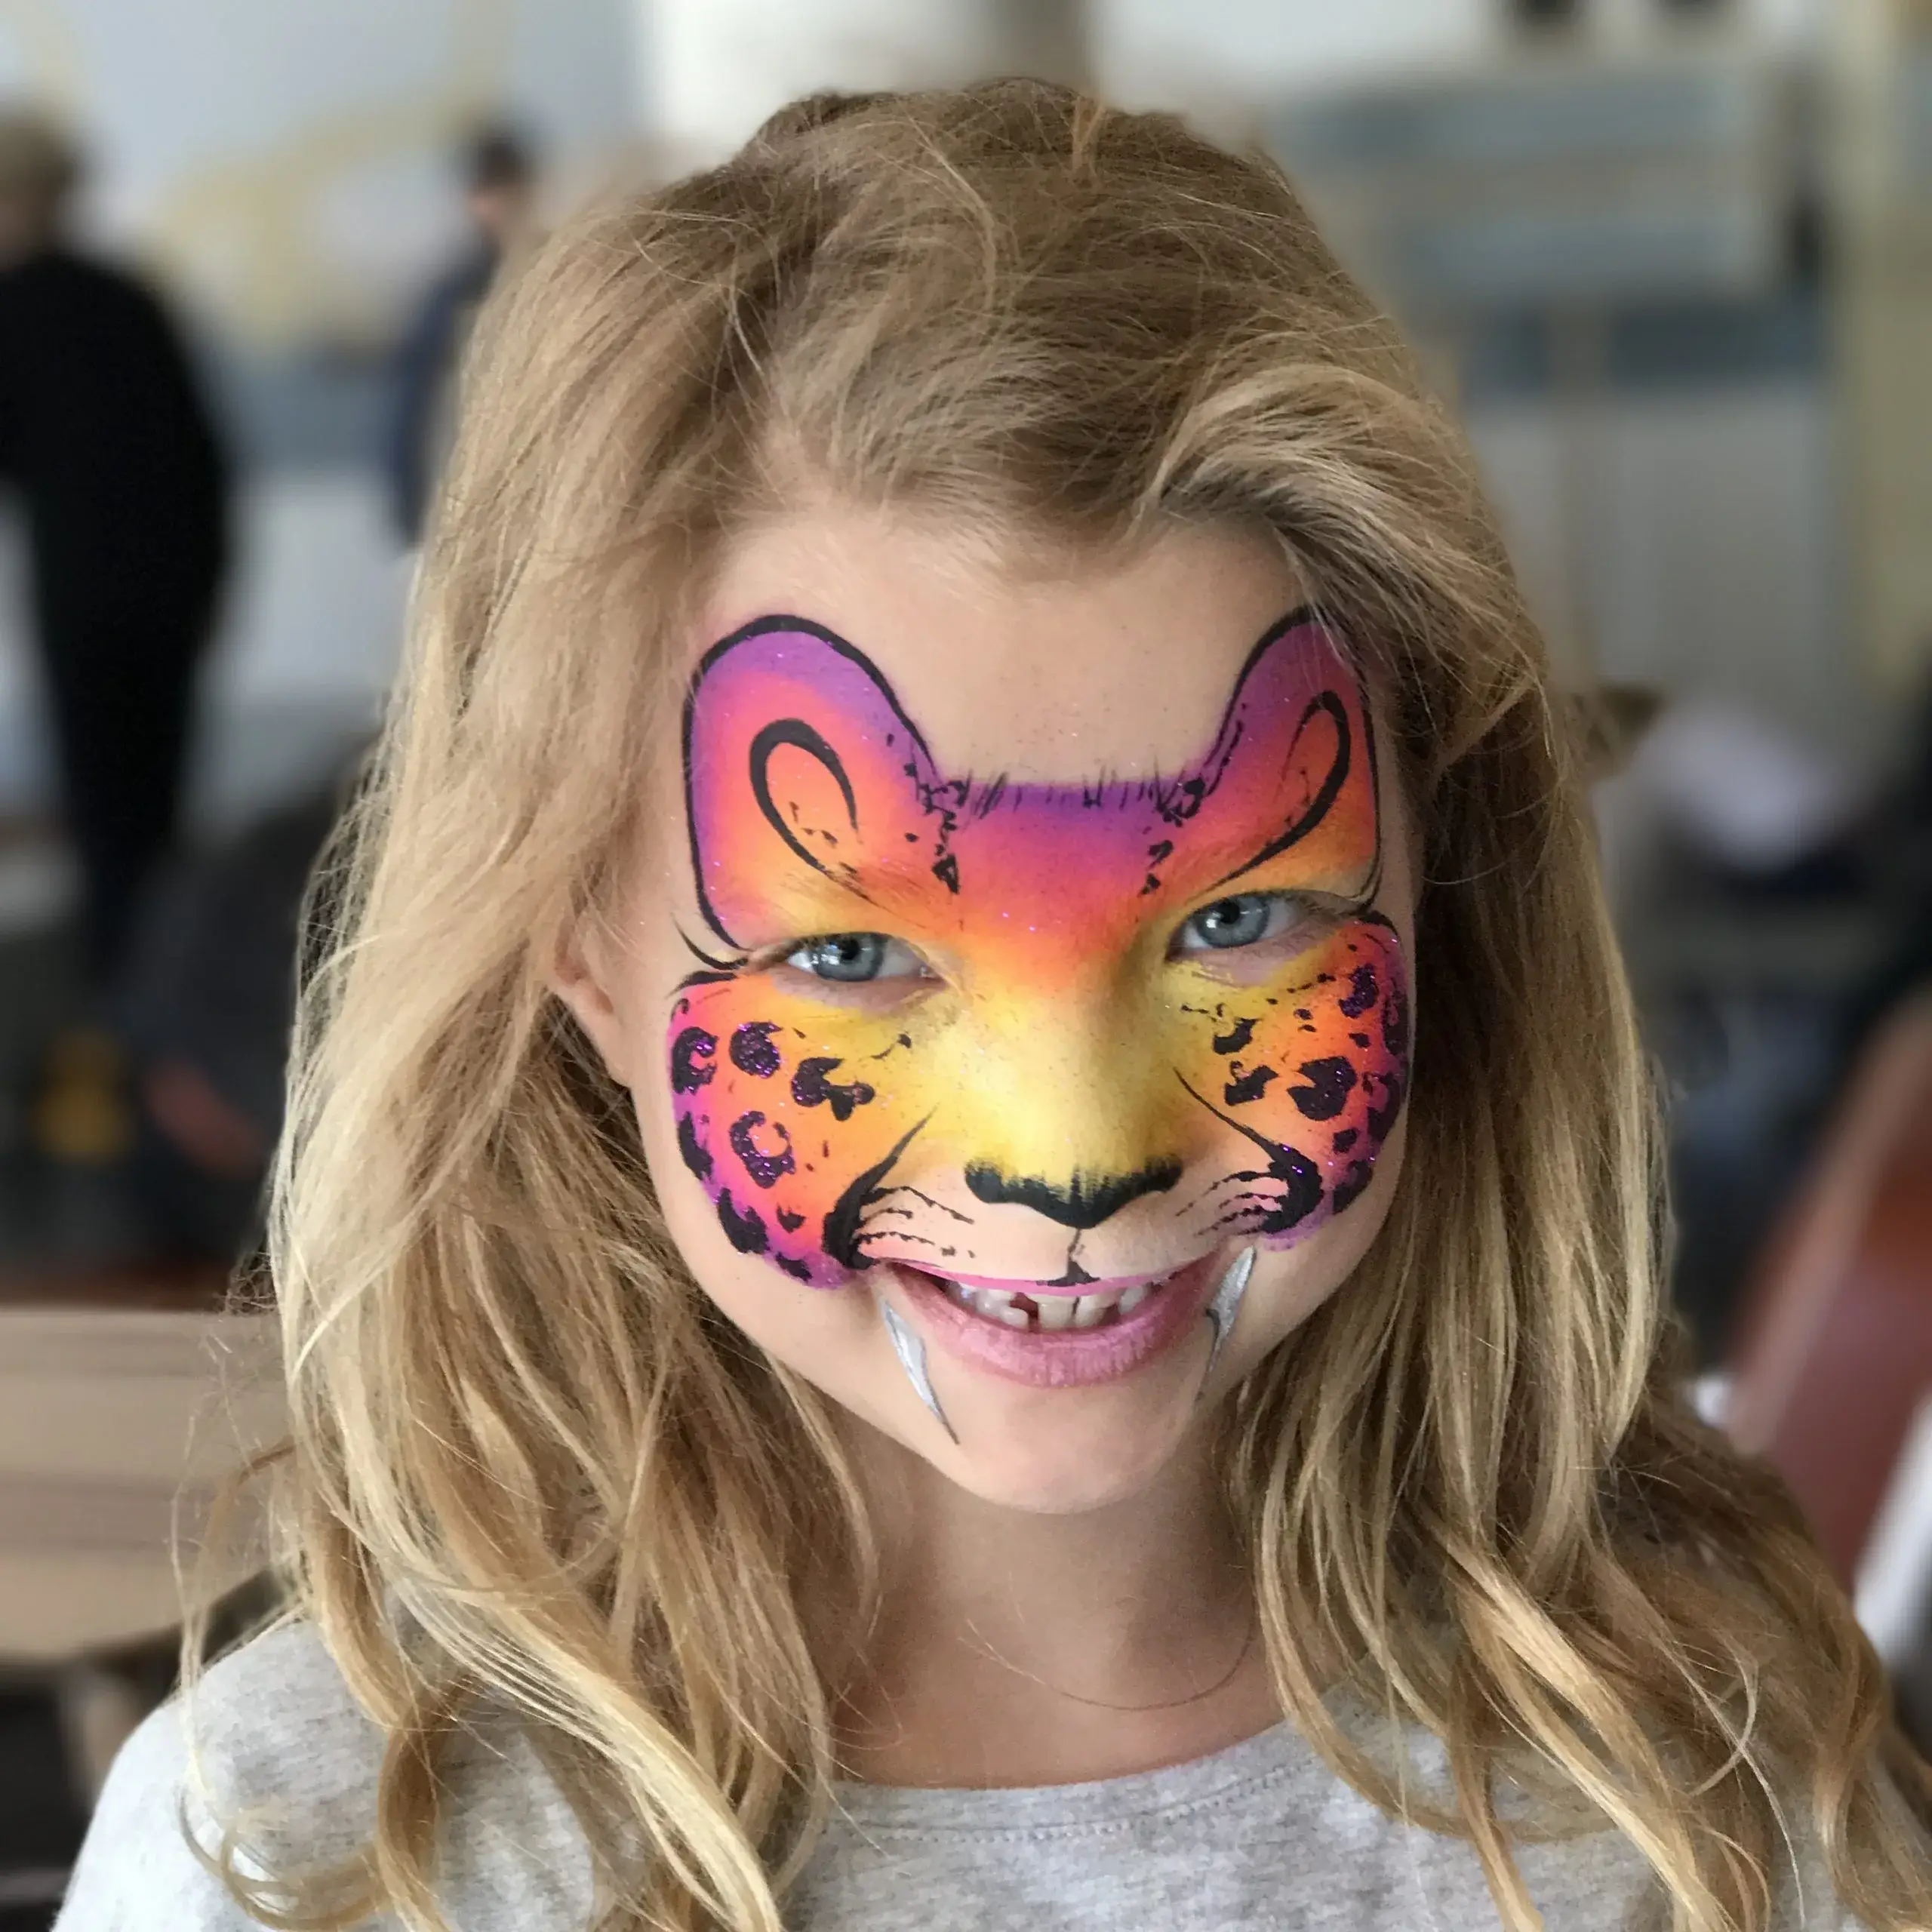 Kids enjoying colorful face painting with safe, non-toxic paints.